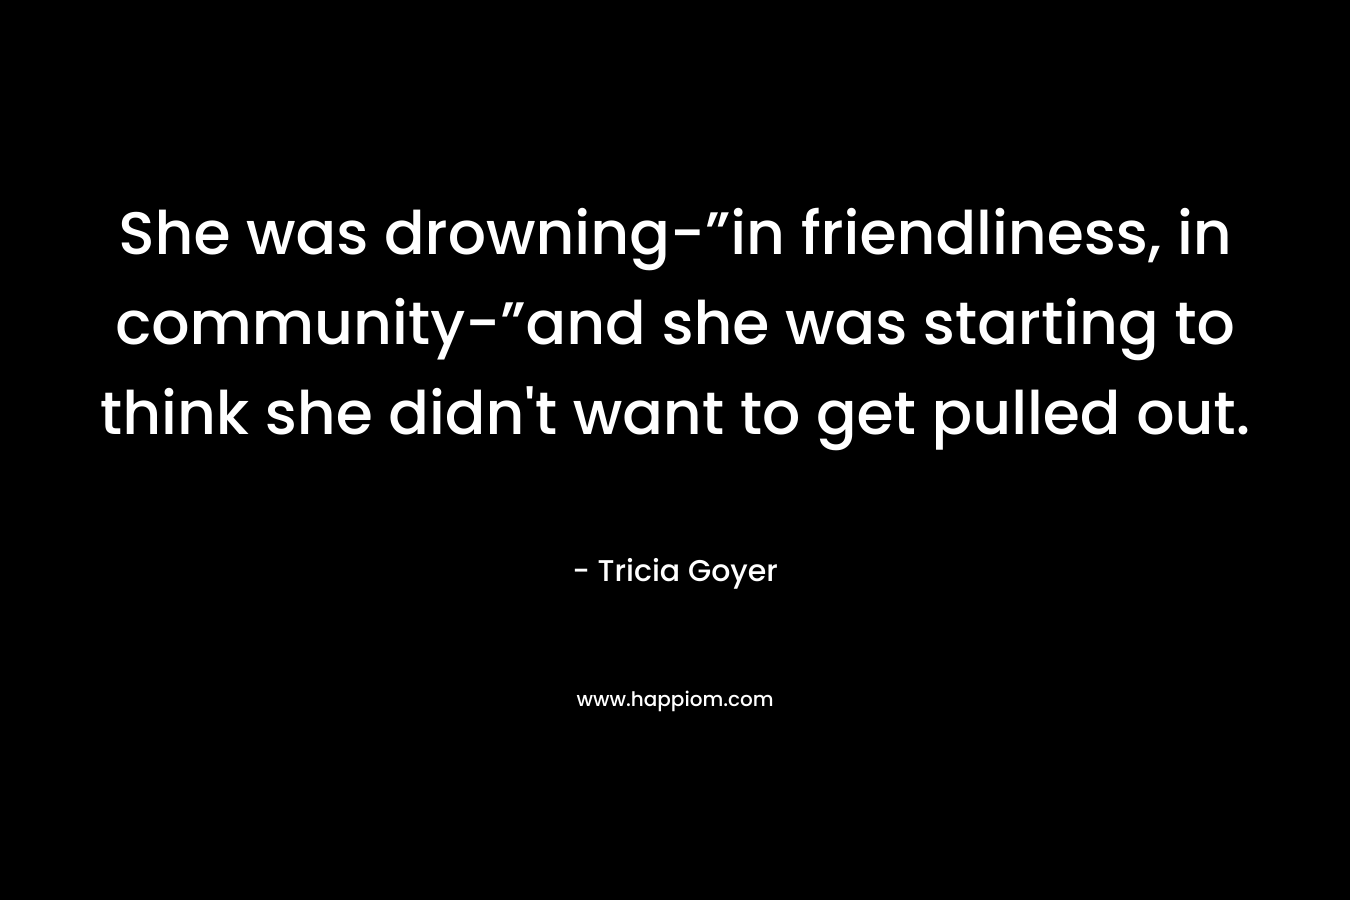 She was drowning-”in friendliness, in community-”and she was starting to think she didn’t want to get pulled out. – Tricia Goyer